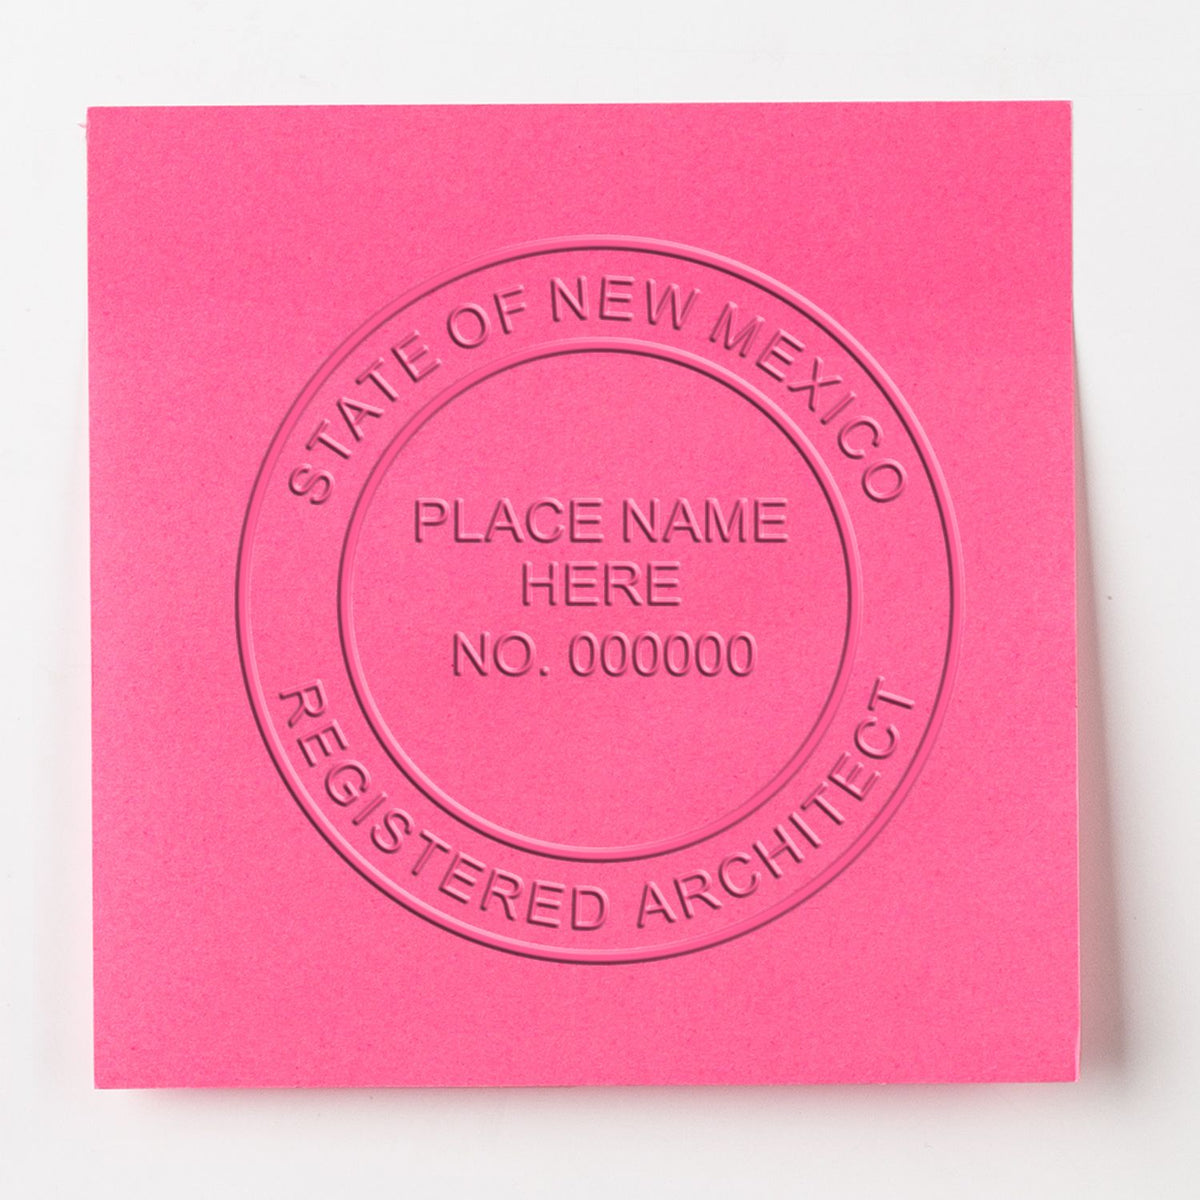 An alternative view of the Hybrid New Mexico Architect Seal stamped on a sheet of paper showing the image in use